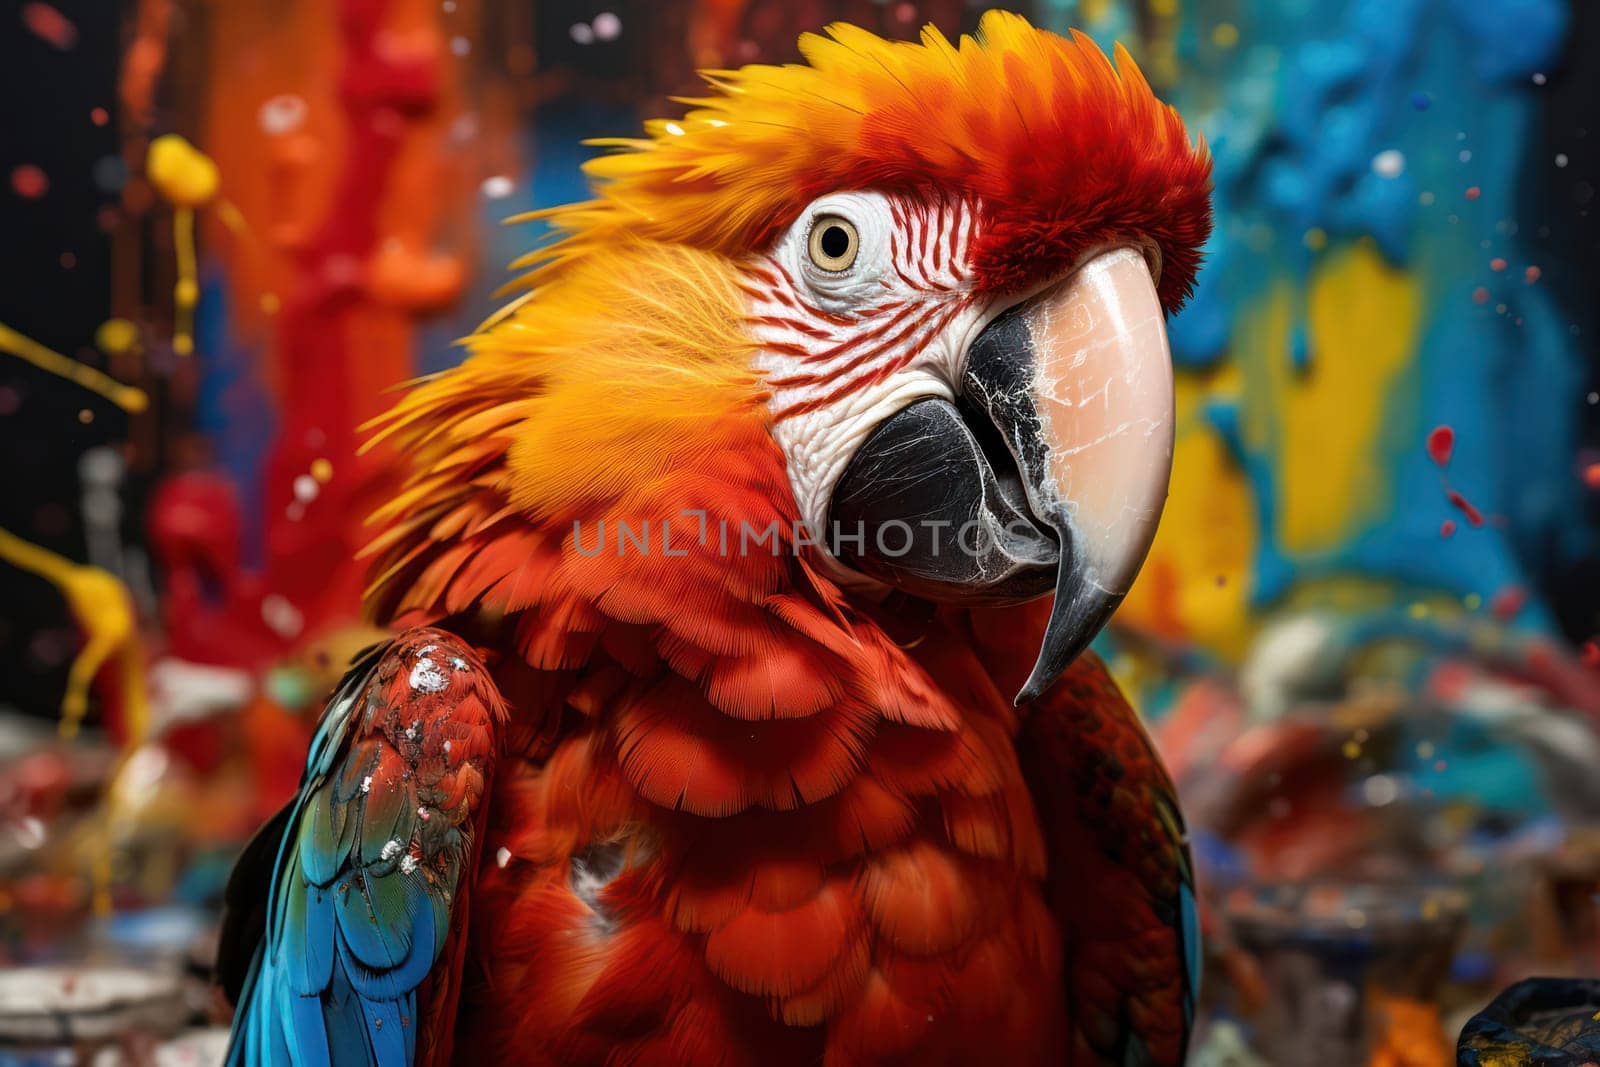 Vibrant Exotic Beauty: Close-up Portrait of a Red and Green Macaw, a Stunning Tropical Bird with Bright Feathers, in a Colorful Jungle Background